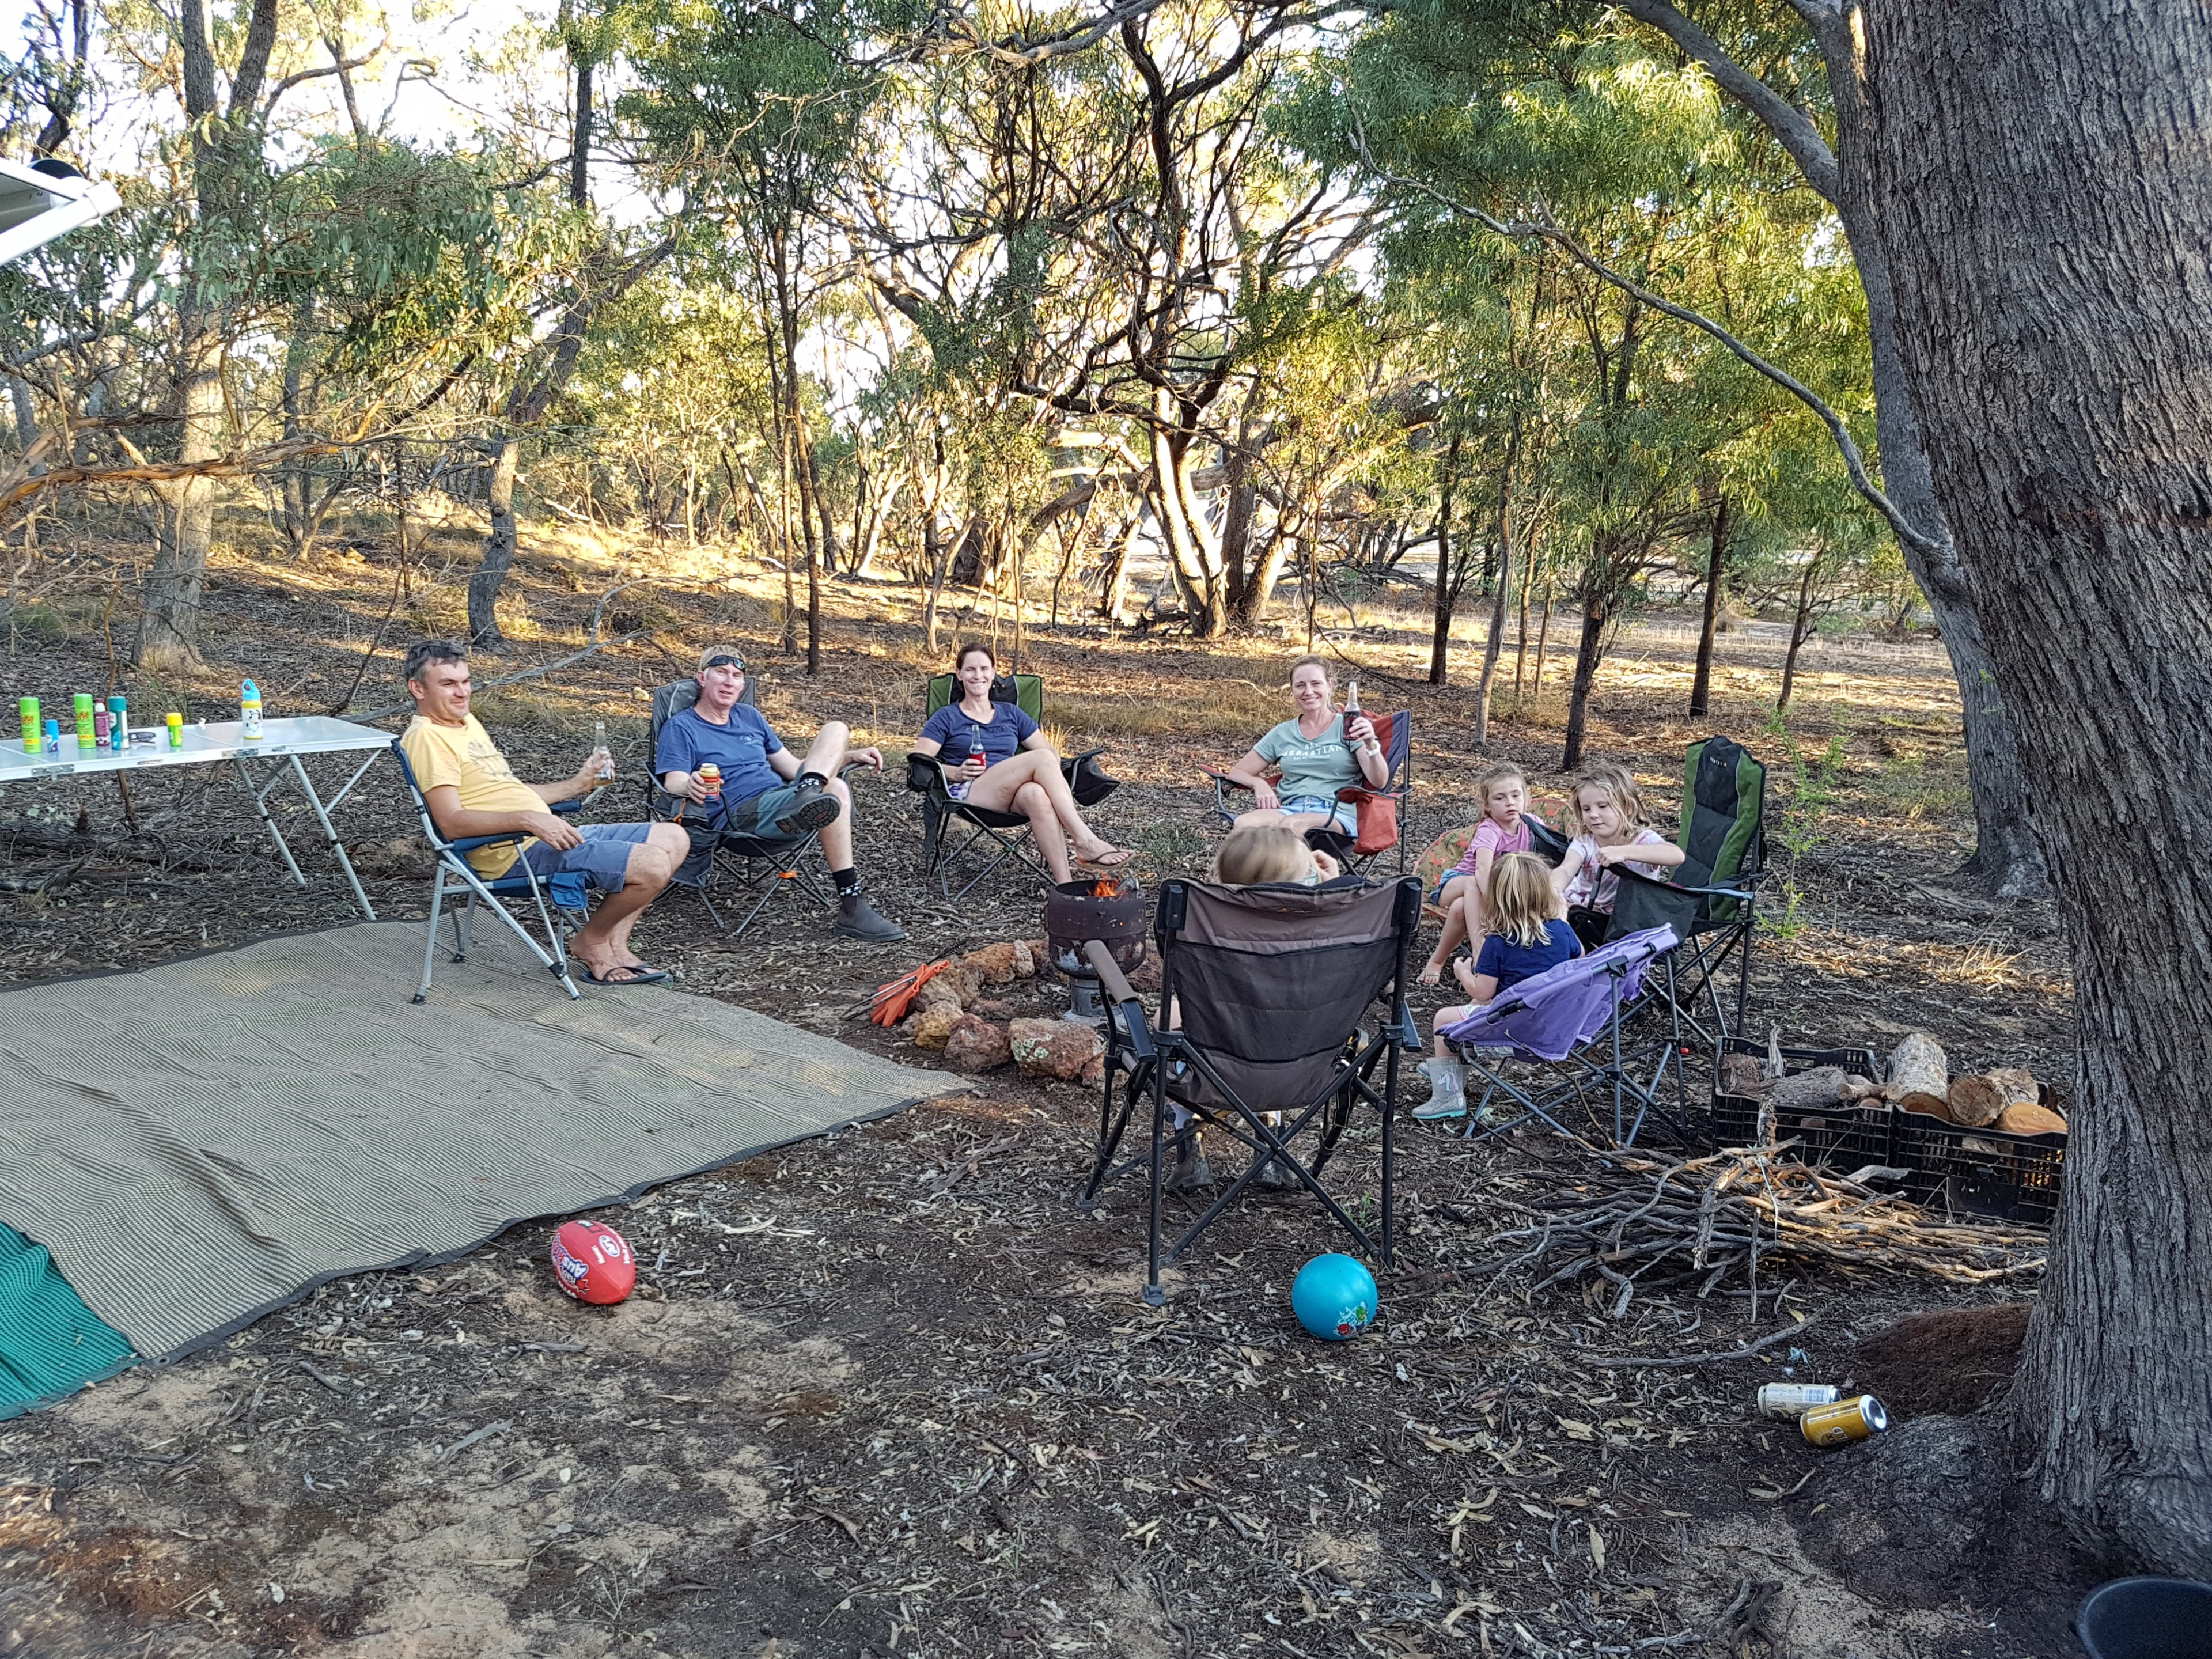 Relaxing, happy campers right inside the bush on JABEZ FARM